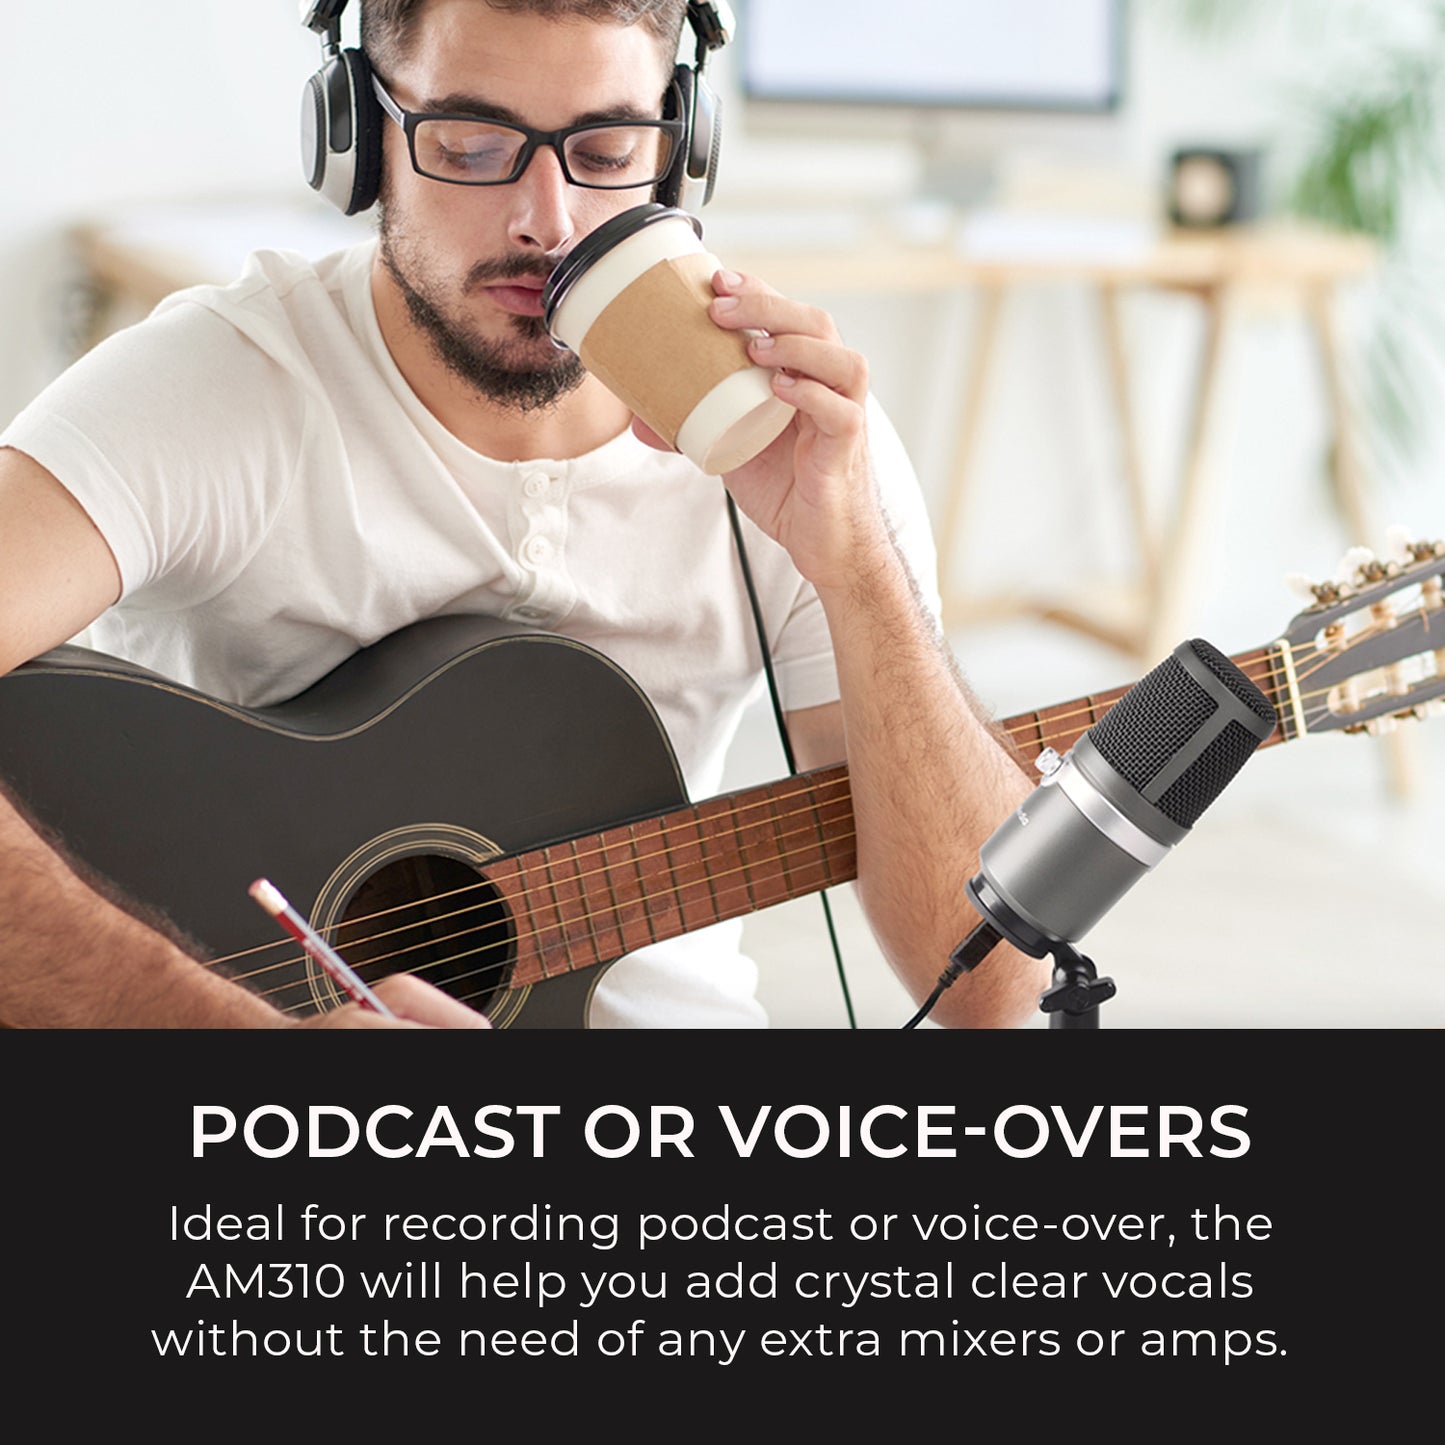 Podcast or voice overs: Ideal for recording podcast or voice-over, the AM310 will help you add crystal clear vocals without the need of any extra mixers or amps.